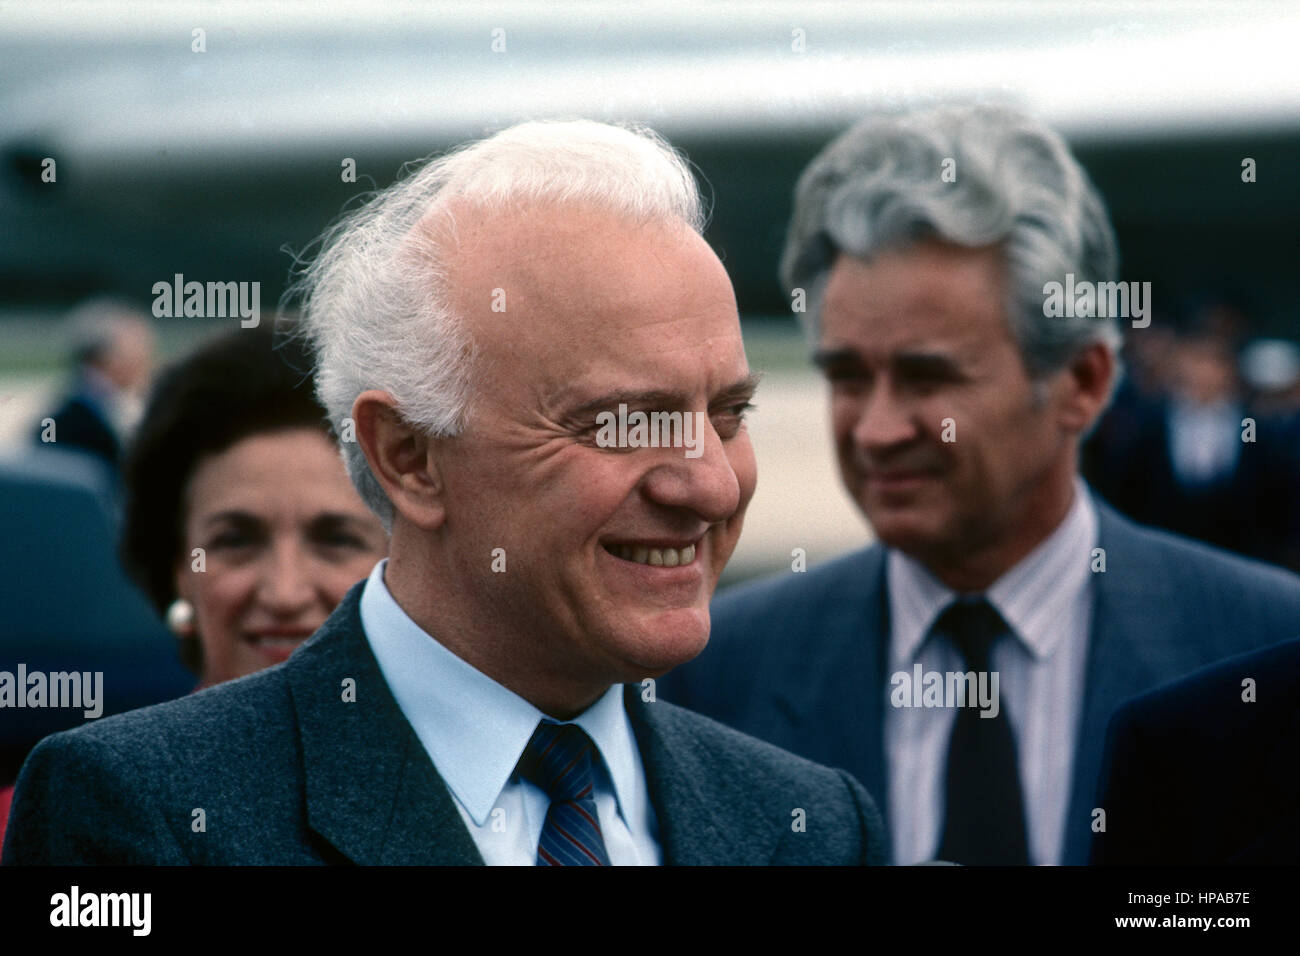 Soviet Foreign Minister Eduard Shevardnadze signs the Nuclear Risk Reduction Center Agreement in the Rose Garden of the White House on September, 15th, 1987 Photo By Mark Reinstein Stock Photo